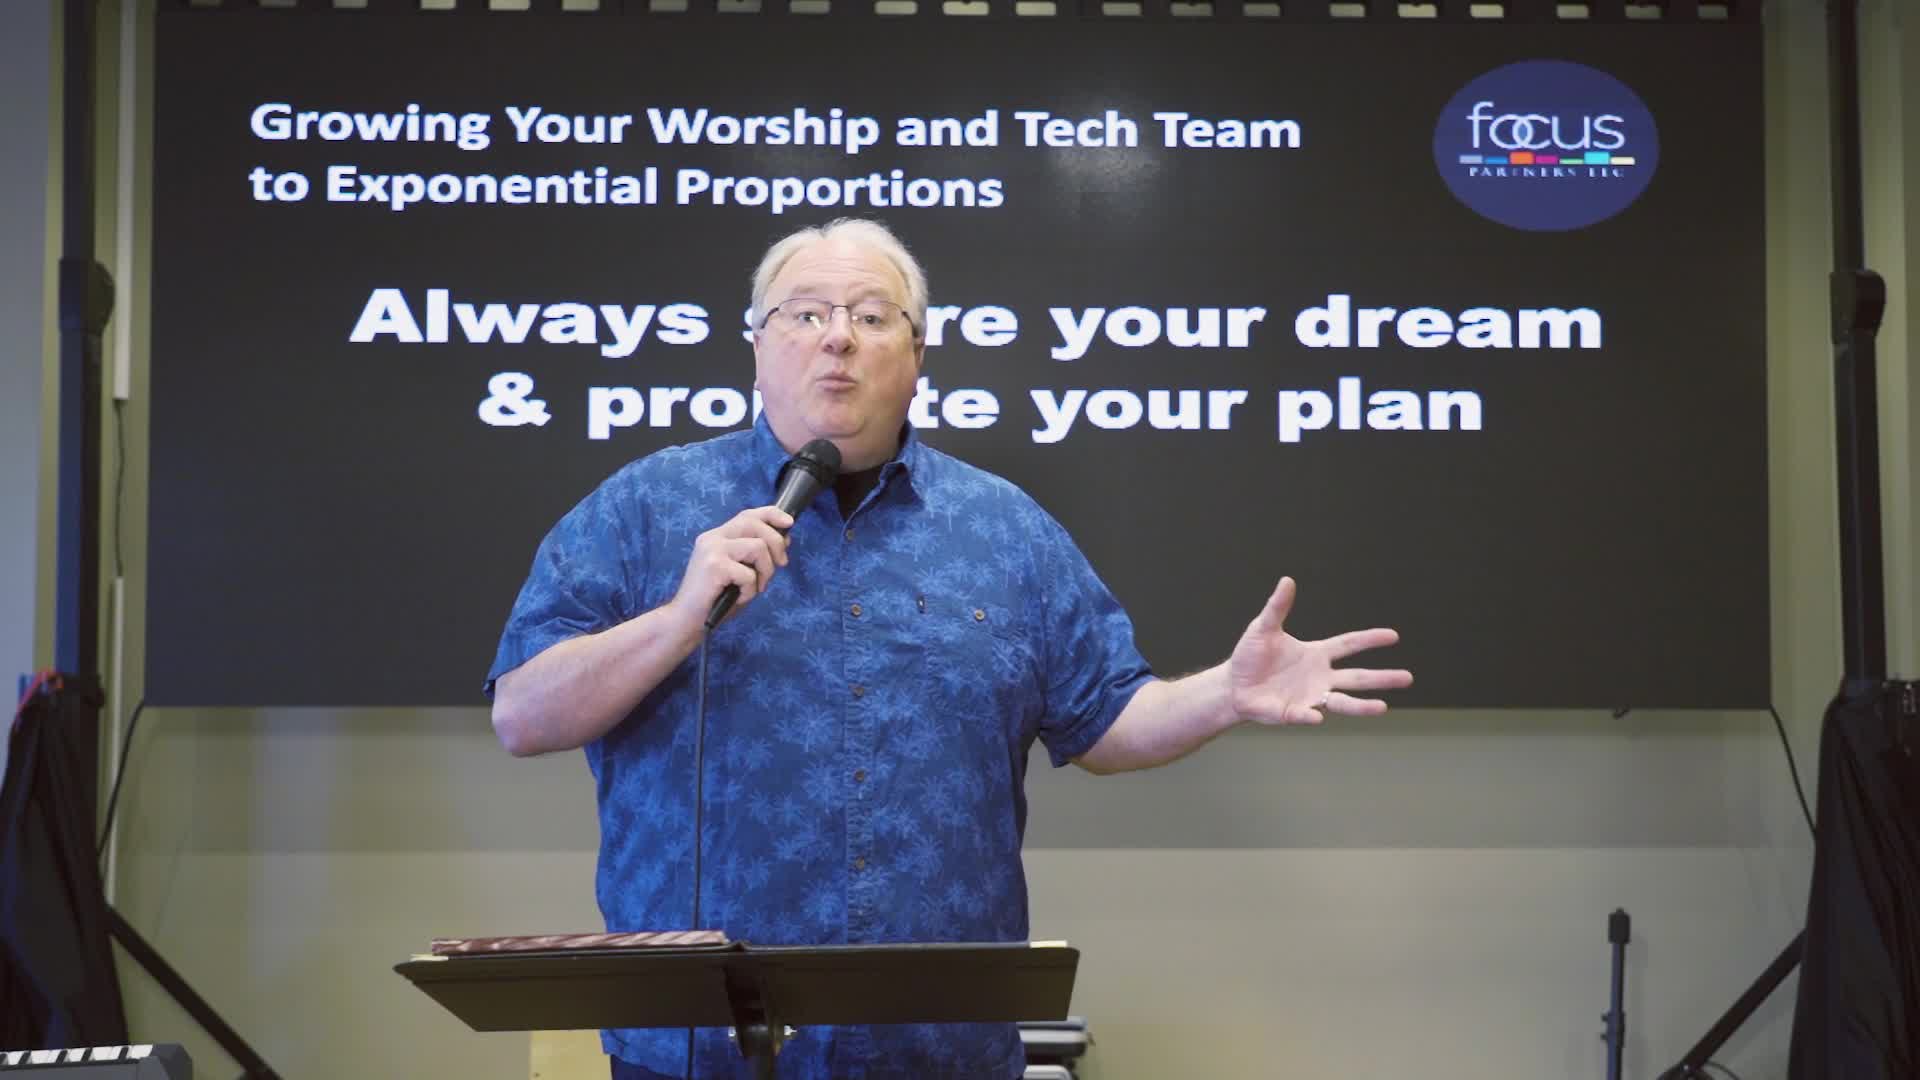 Matt Brown - Dartnall - Dave - Growing Your Worship and Tech Team to Exponential Proportions